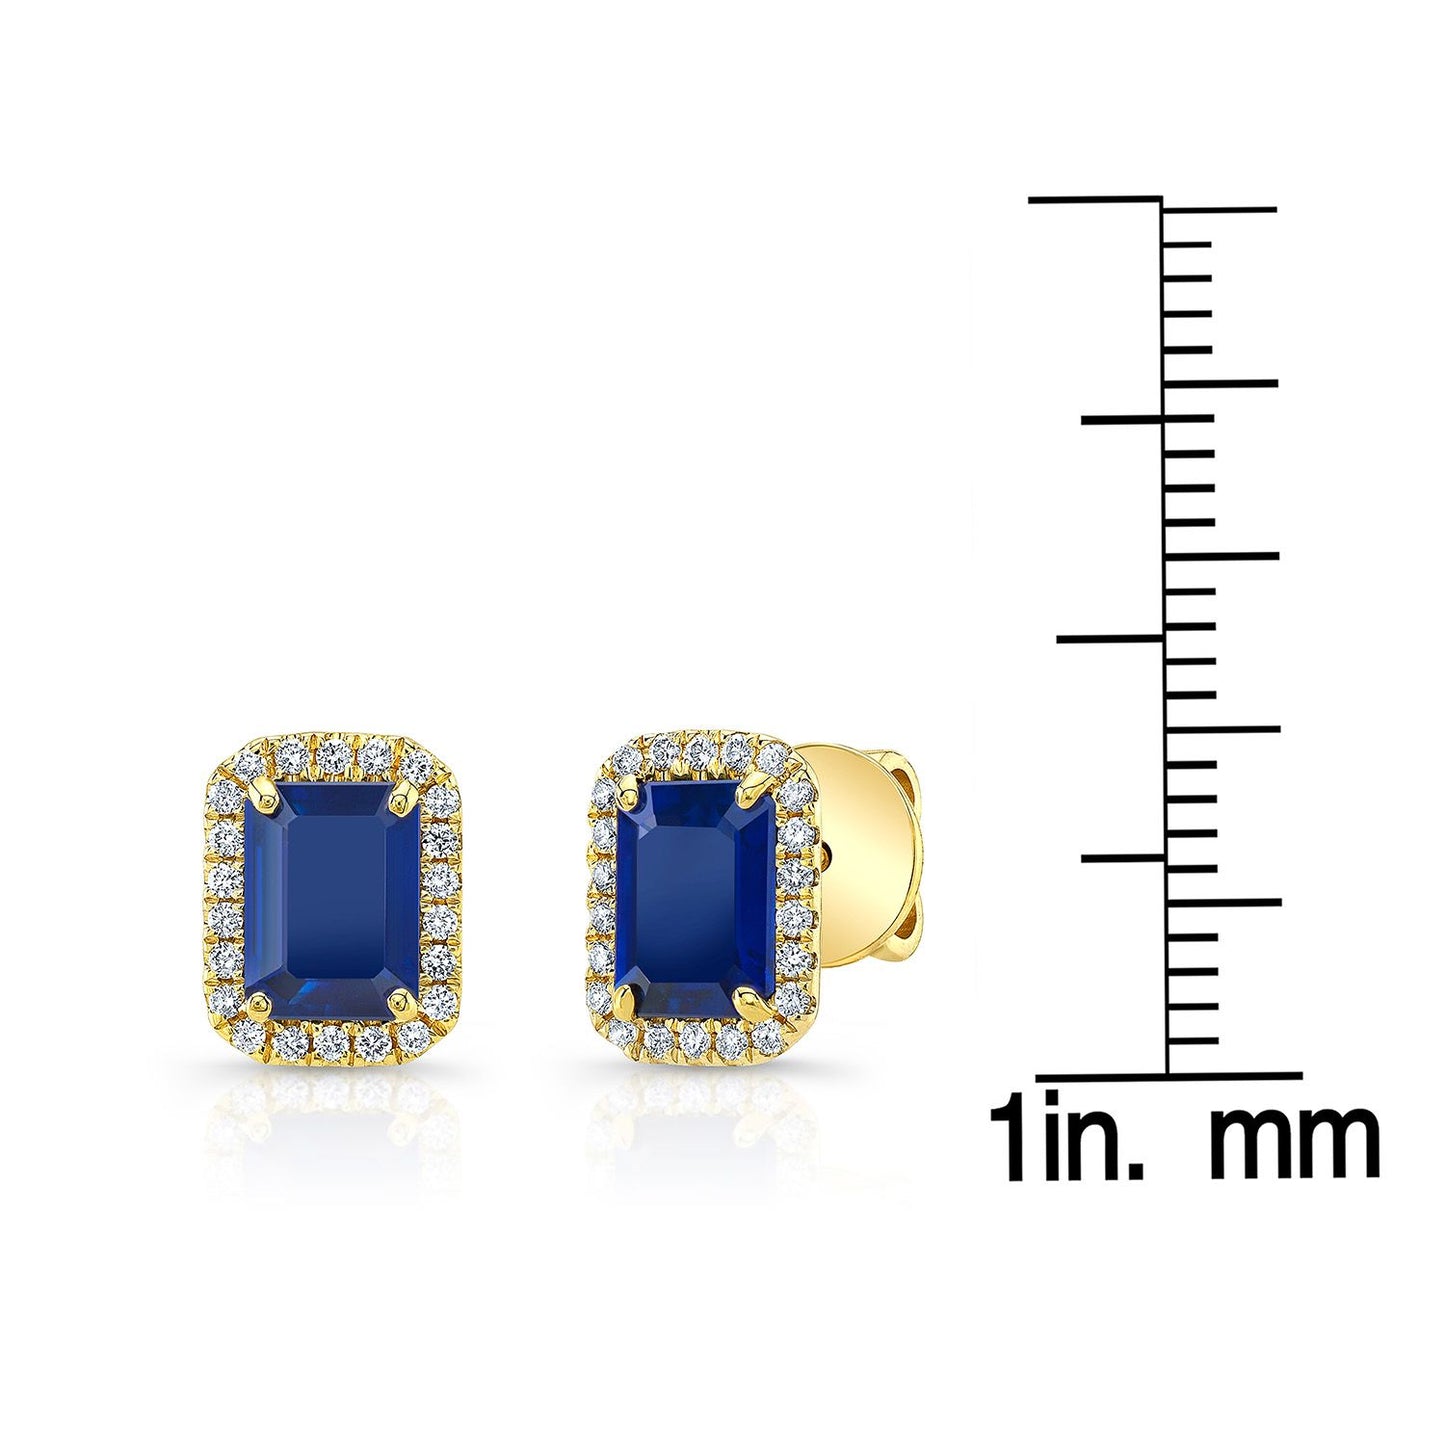 Sapphire And Diamond Octagon Halo Earring In 14k Yellow Gold 0.22ctw